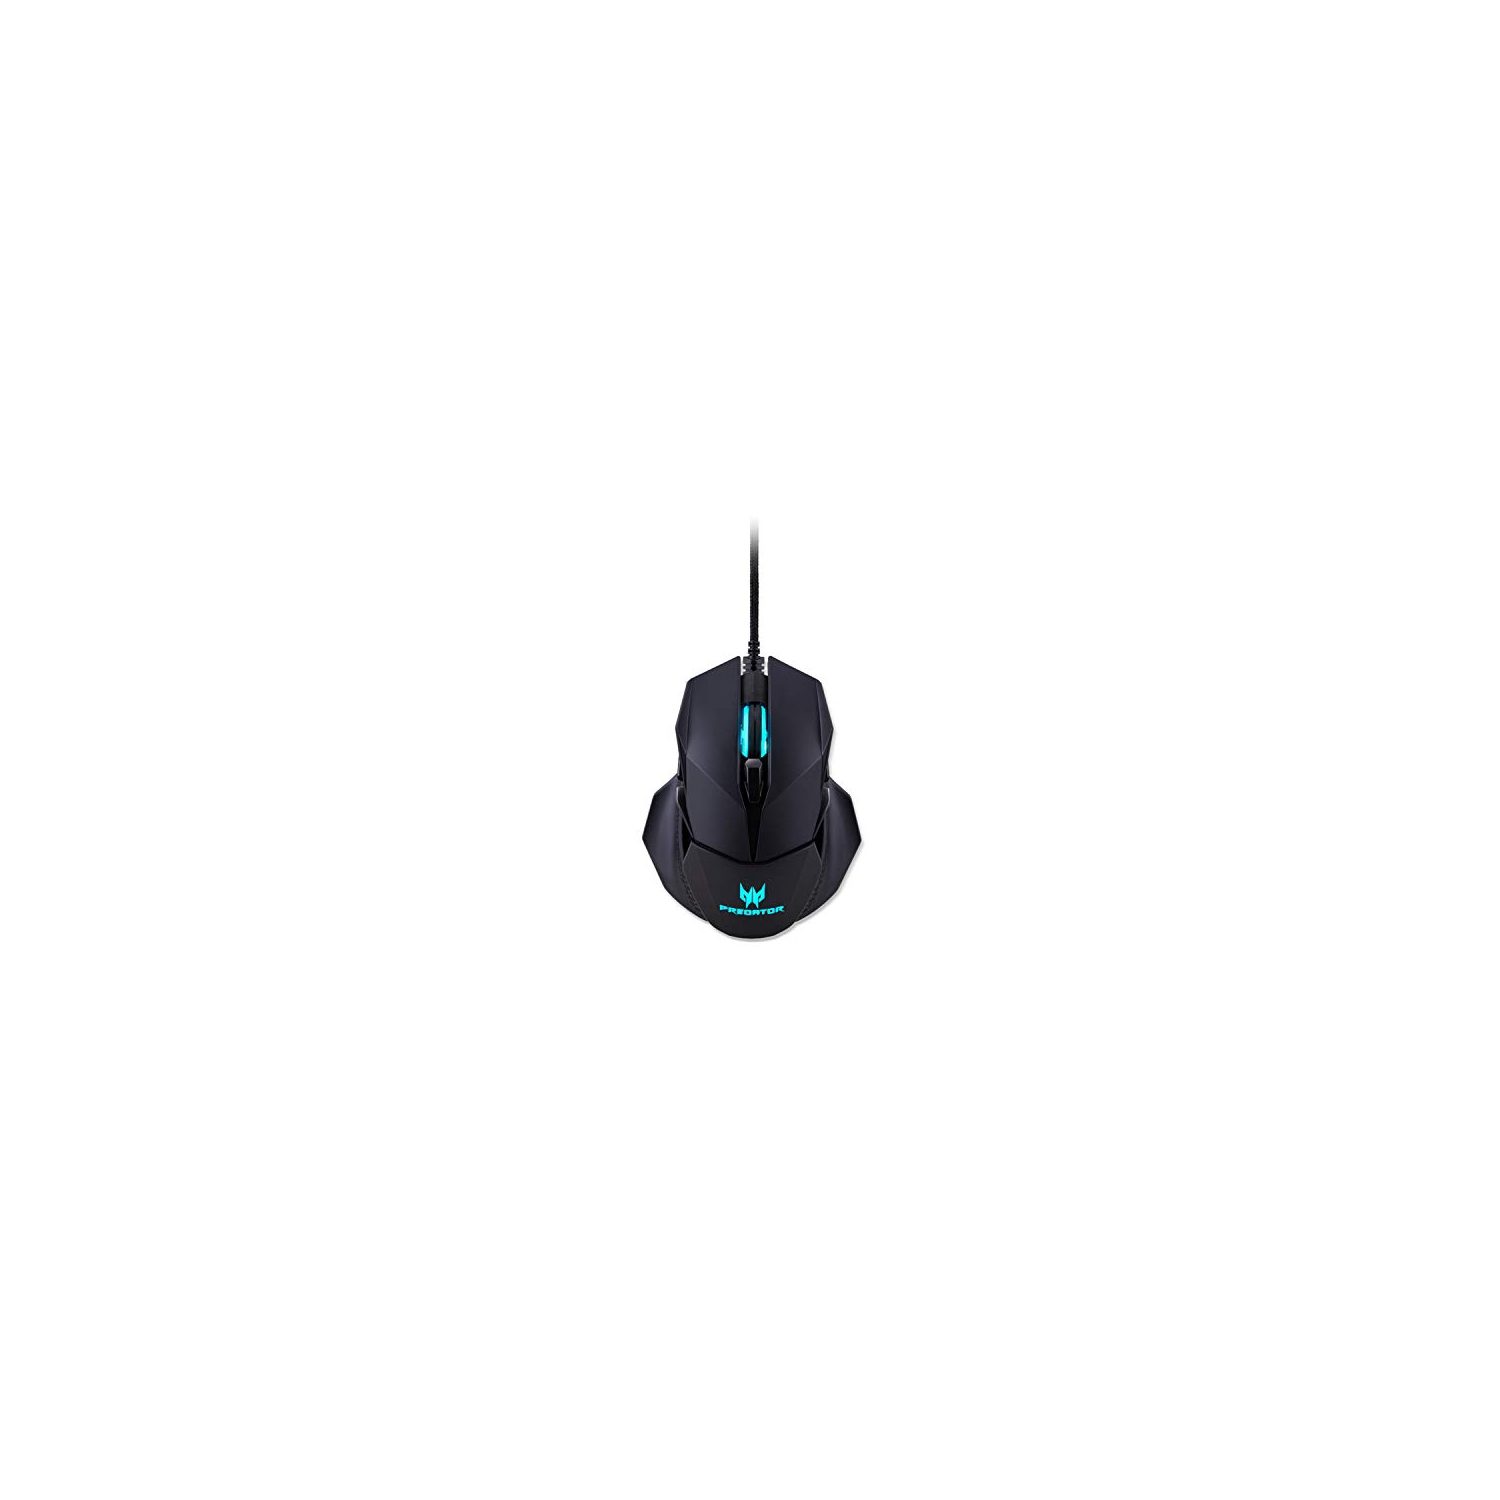 Acer Predator Cestus 500 RGB Gaming Mouse – Dual Omron switches 70M Click Lifetime, Customizable ambidextrous